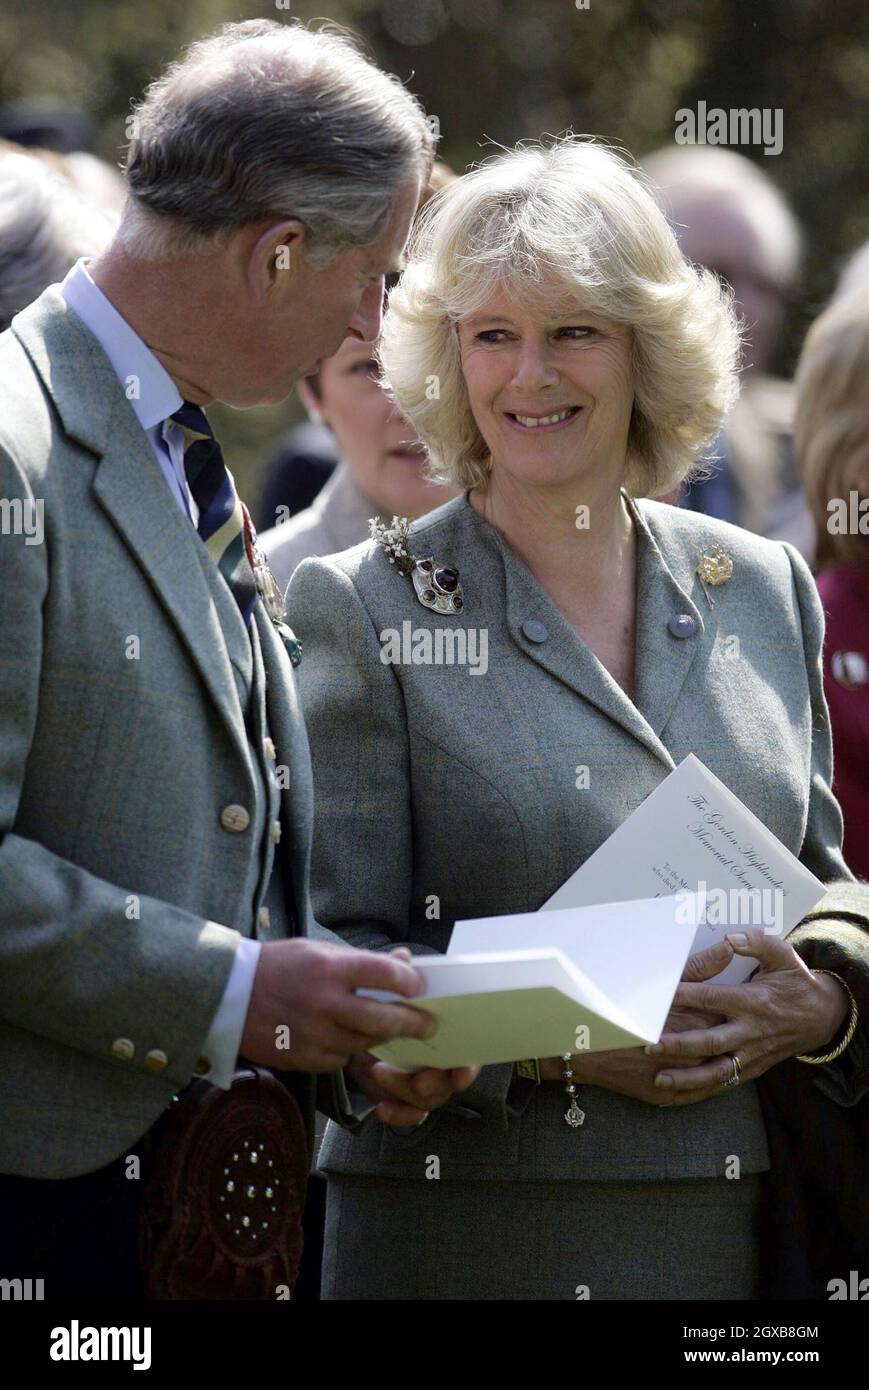 Prince Charles and Camilla Duchess of Cornwall attend a special memorial service to commemorate the lives of soldiers lost during active service at the Gordon Highlanders Regimental museum, Aberdeen, Scotland. Anwar Hussein/allactiondigital.com  Stock Photo